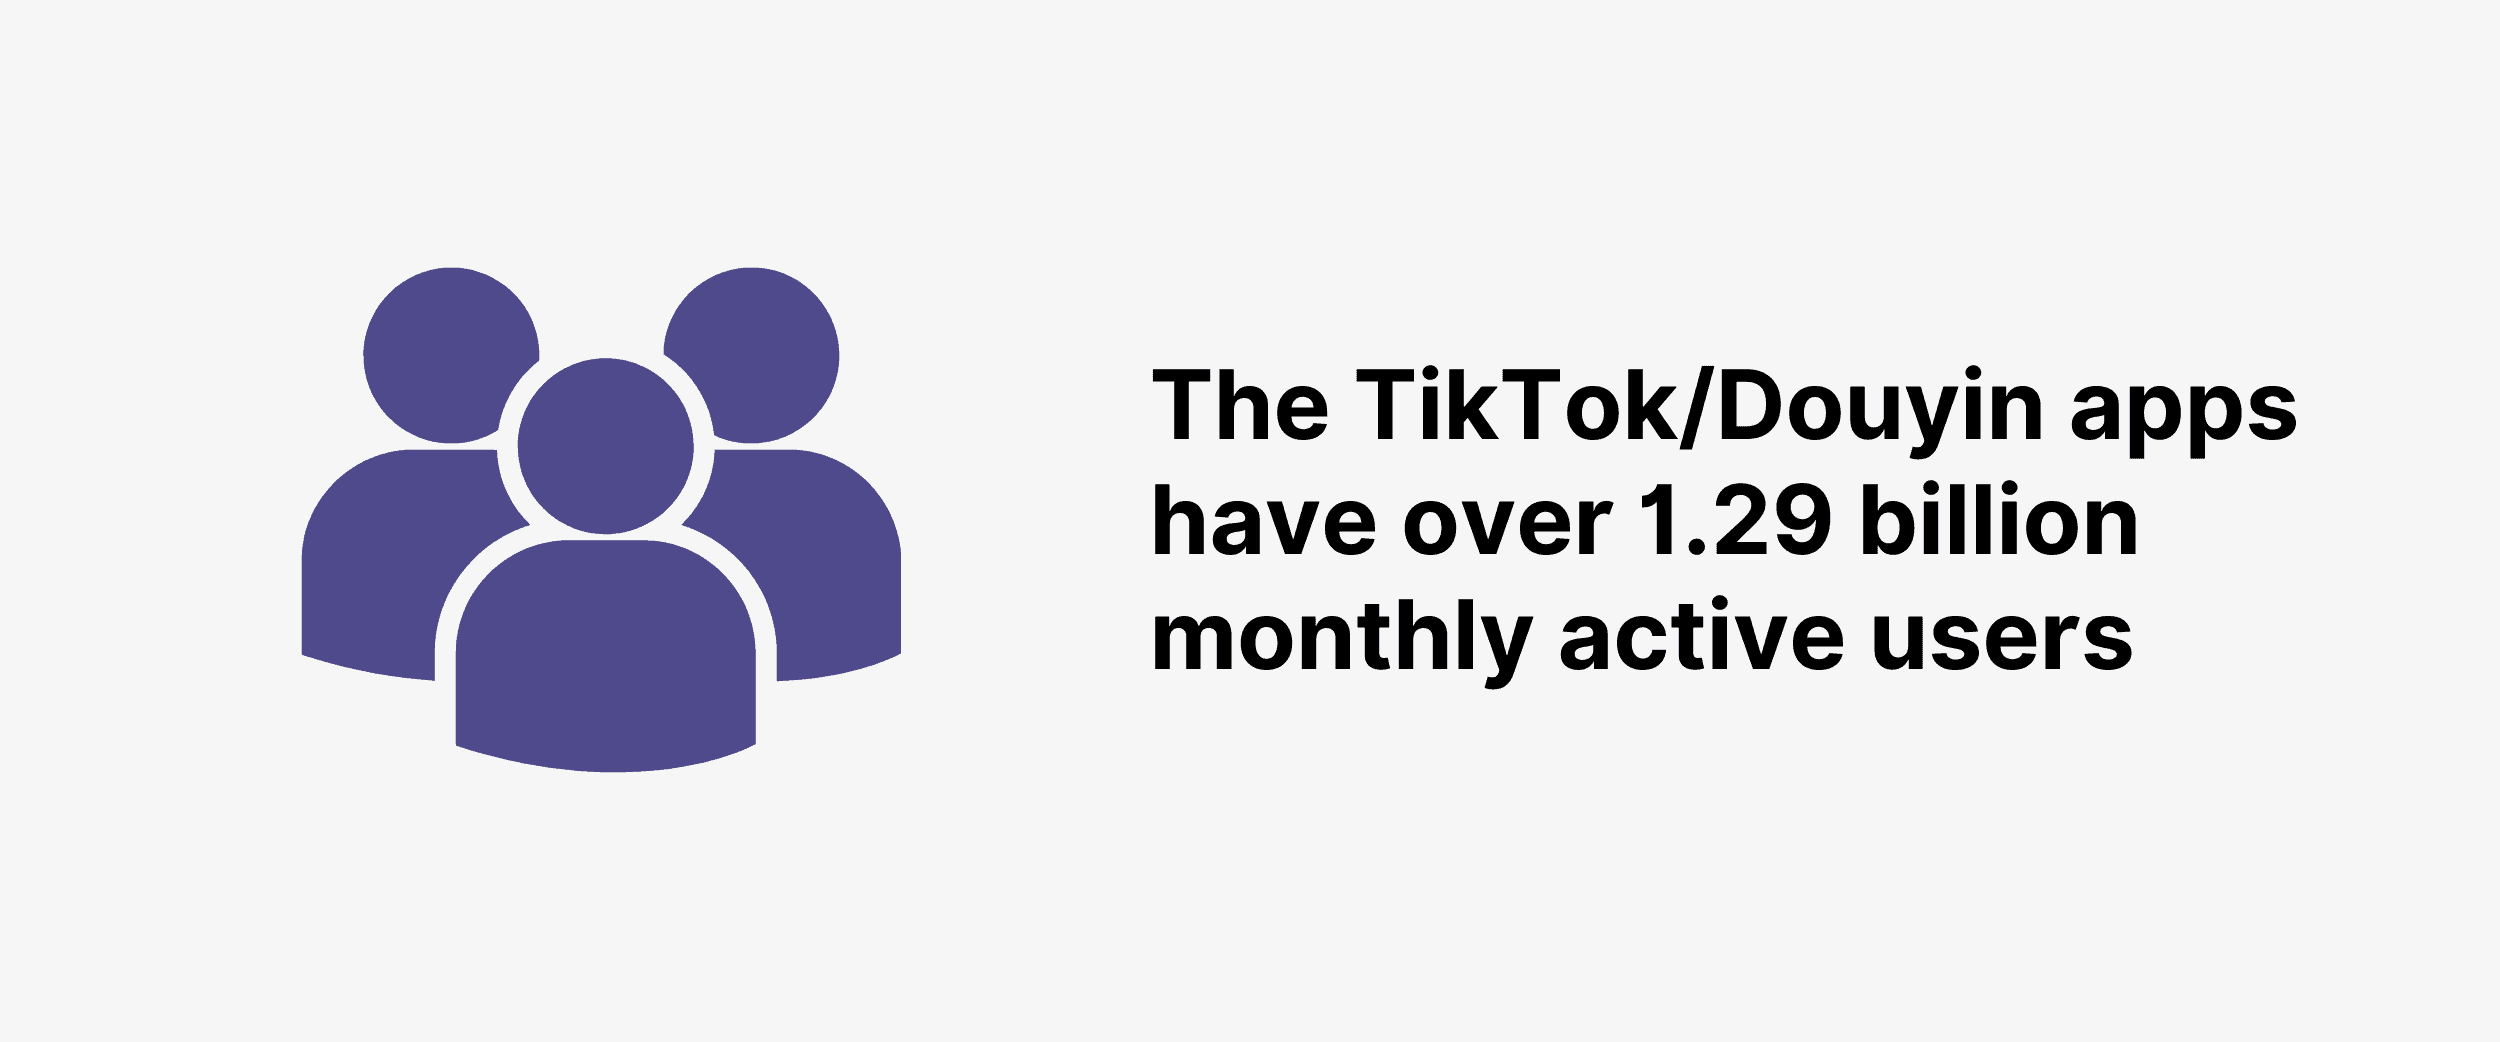 The TikTok/Douyin apps have over 1.29 billion monthly active users